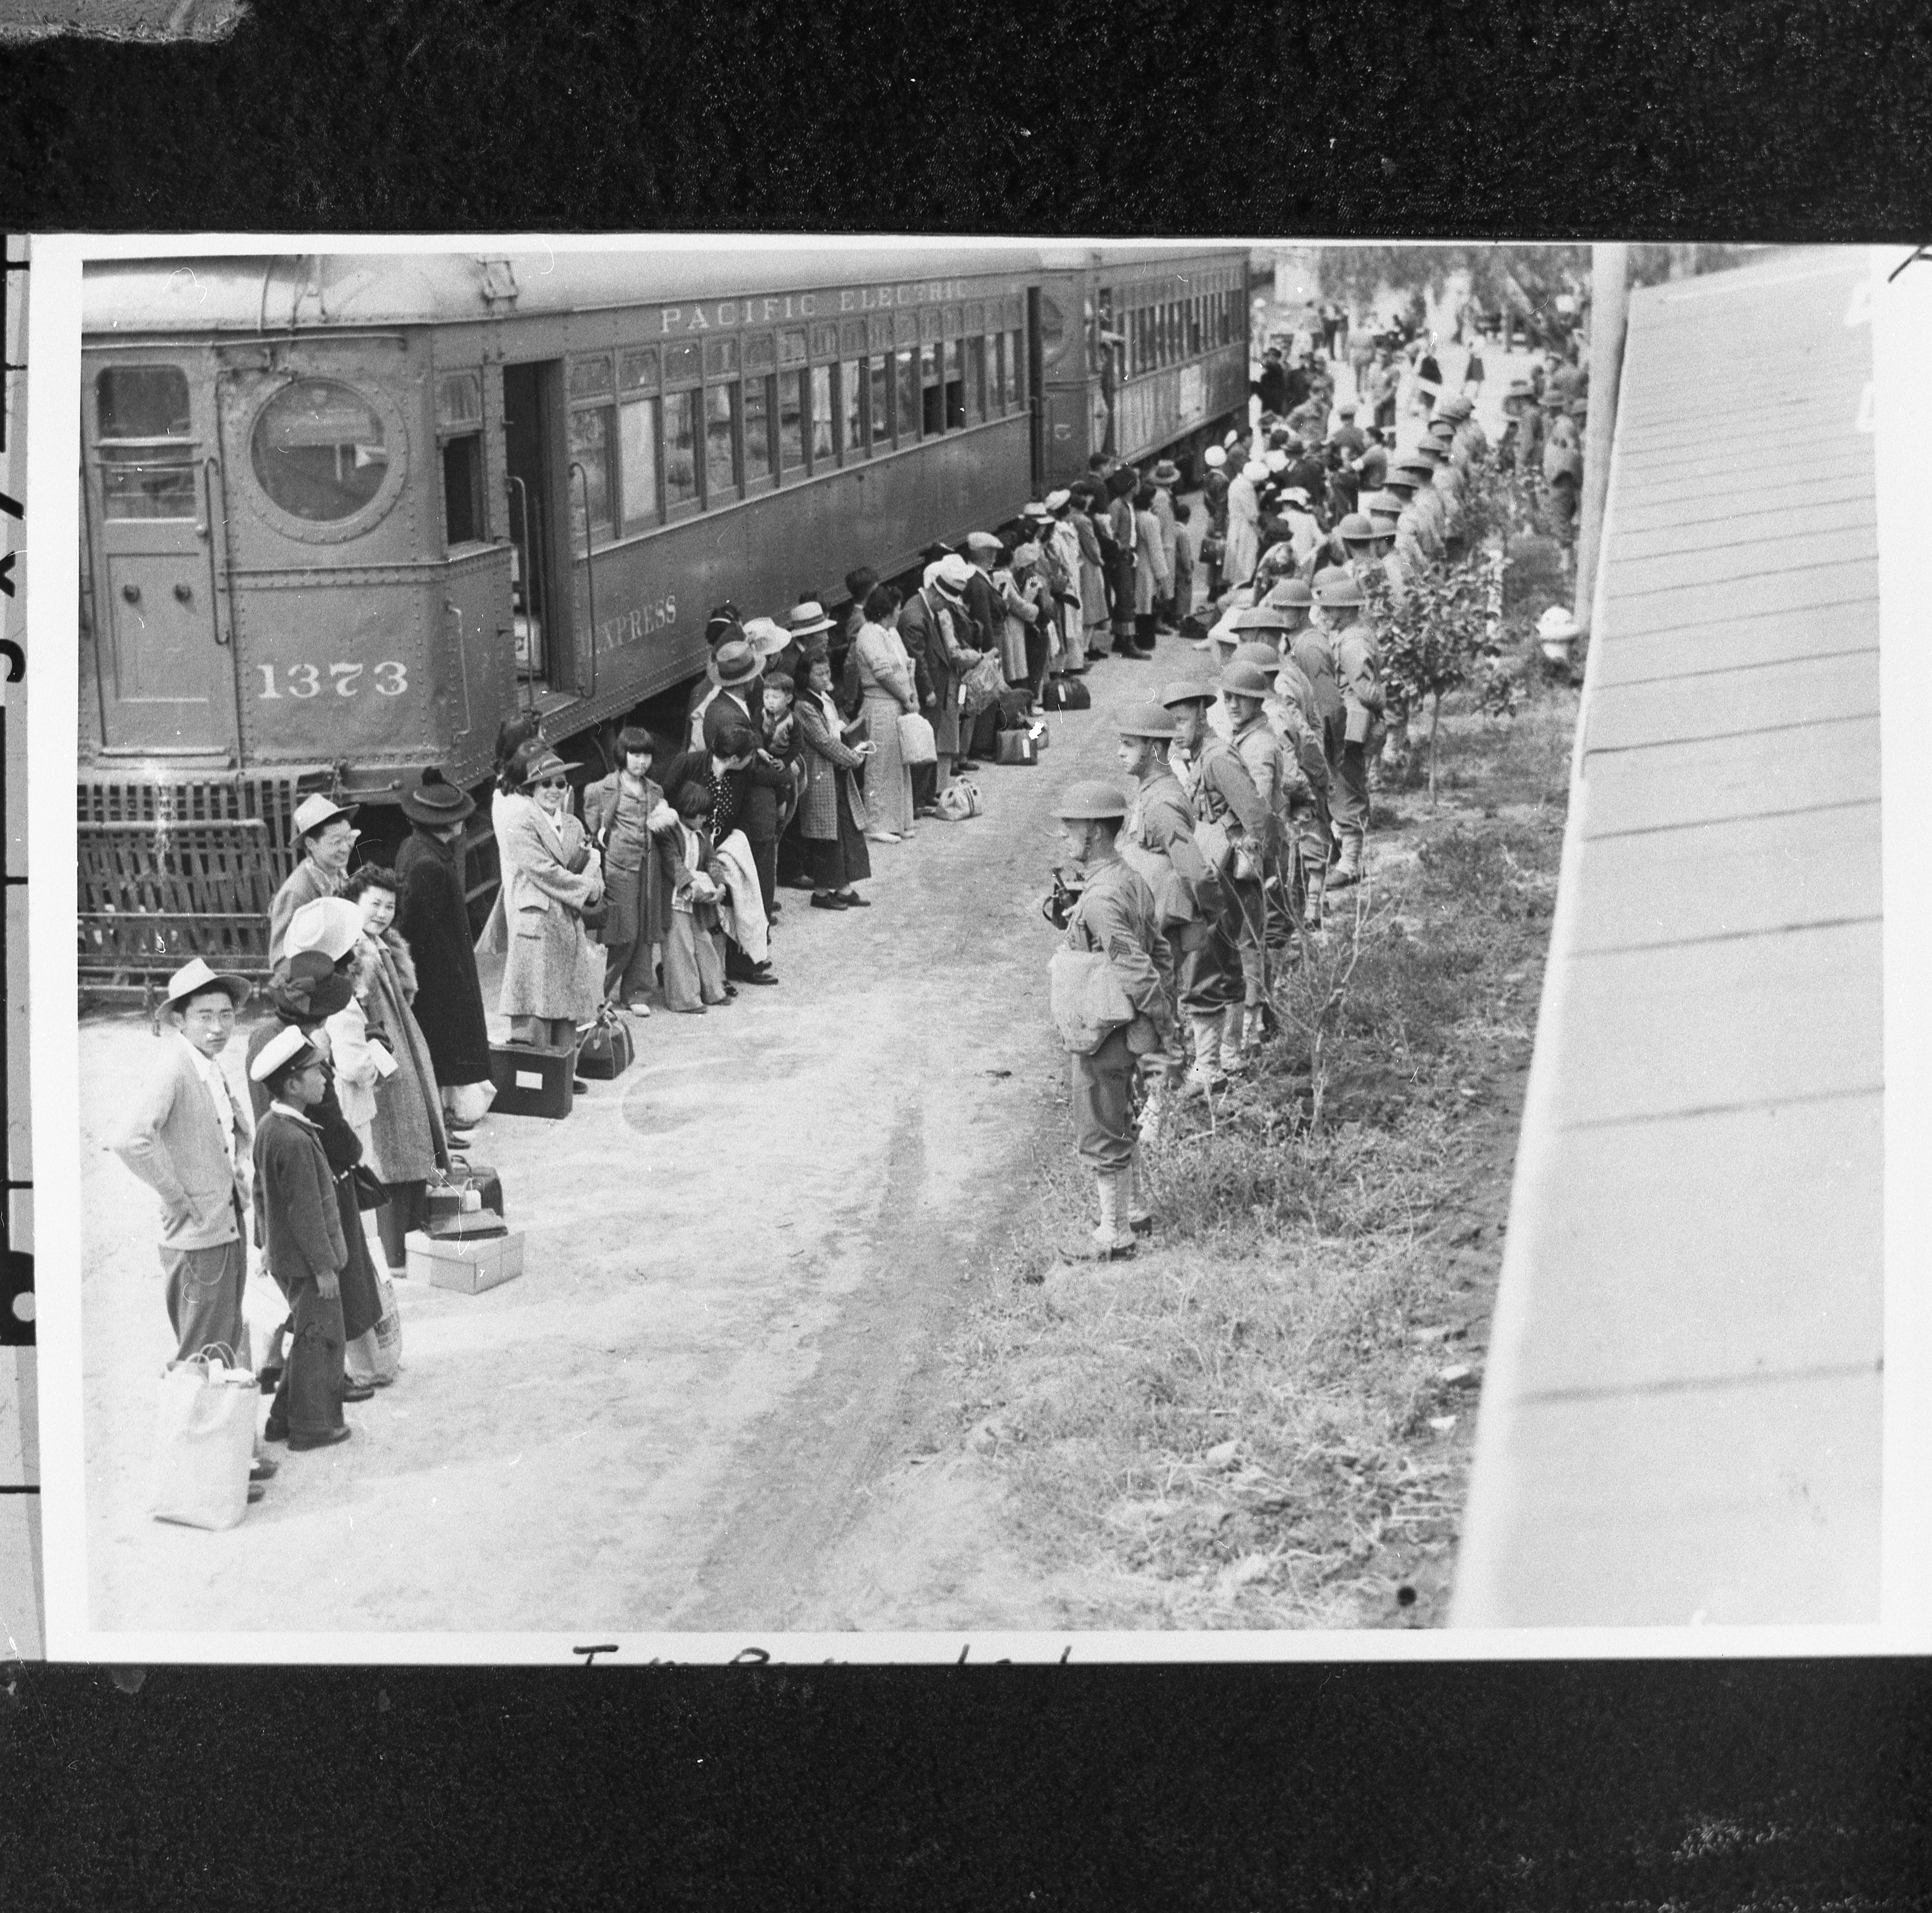 Japanese Americans arrive at the Santa Anita Race Track from San Pedro, California. The race track was used as an "Assembly Center" during the relocation, where "evacuees" lived before being moved inland to internment camps.  April 5, 1942, Clem Alberts (War Relocation Authority). Courtesy of Visual Communications Photographic Archive.